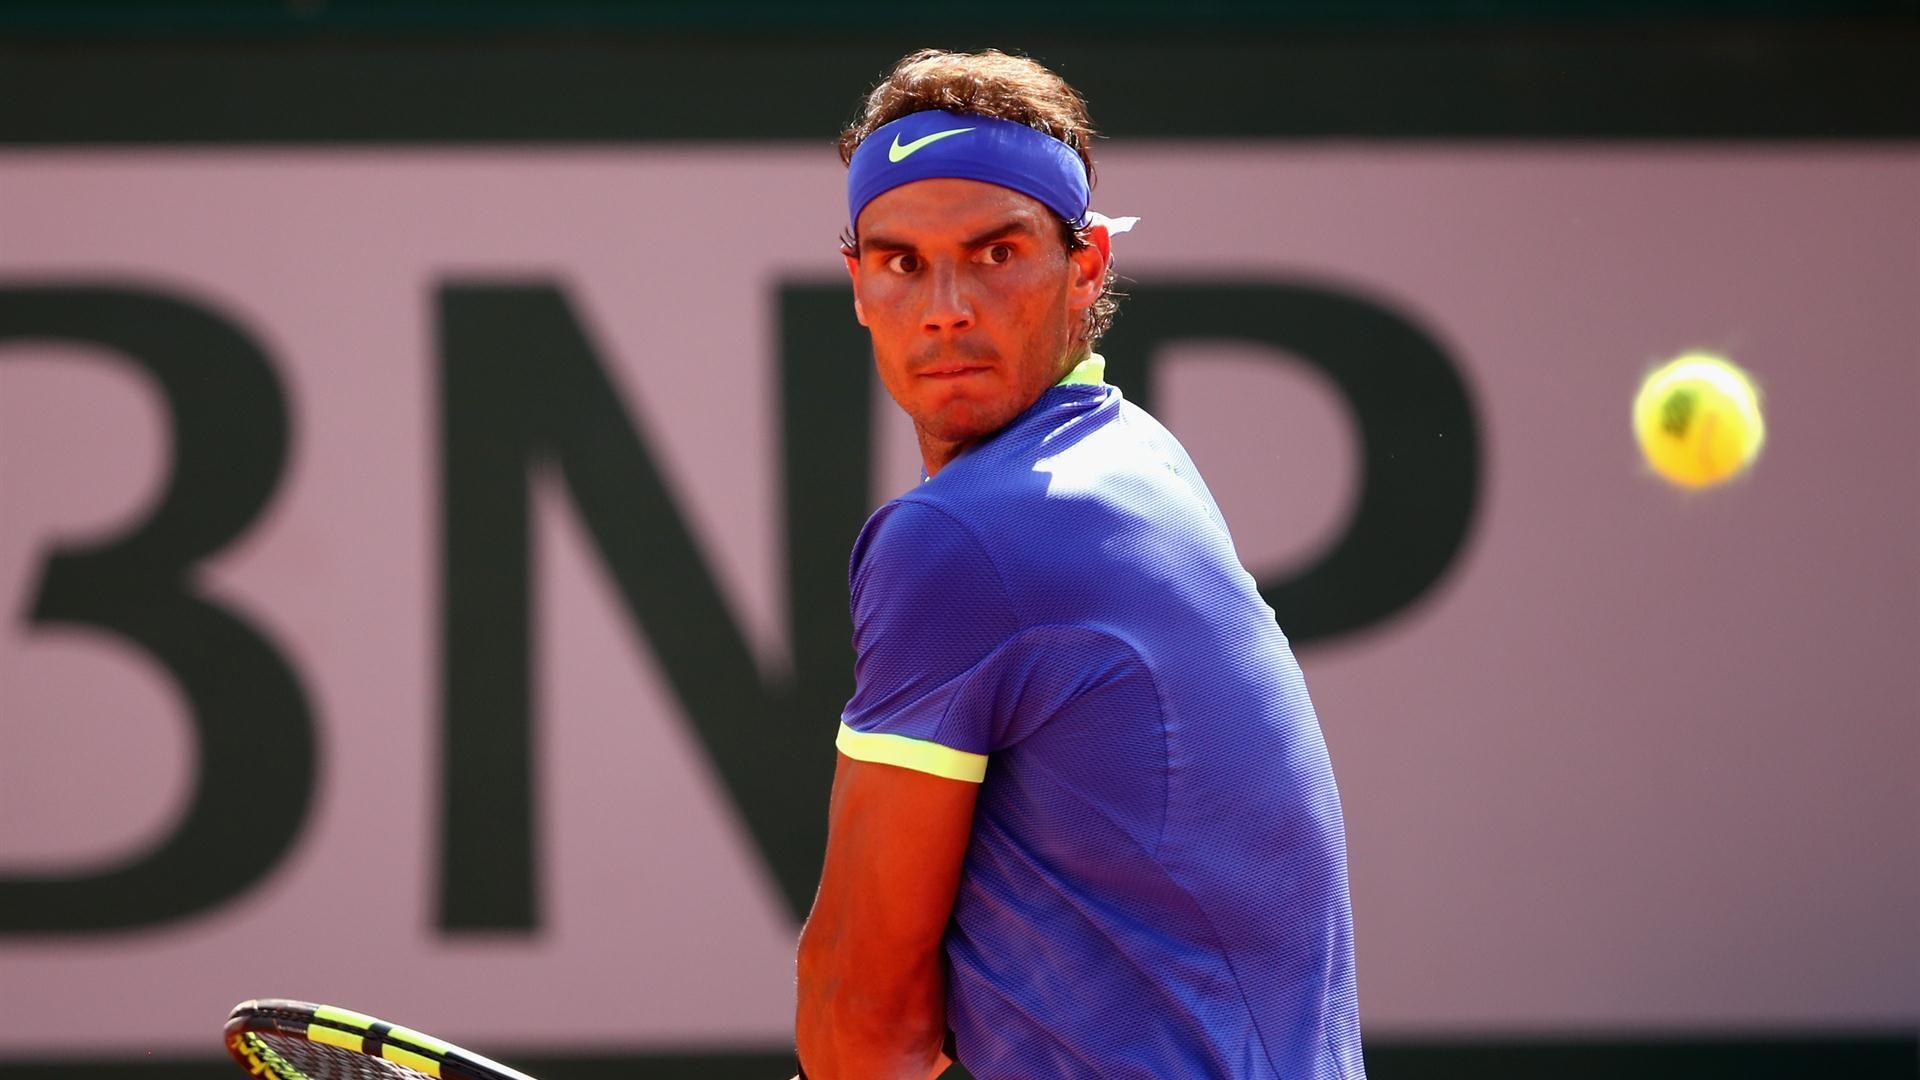 French Open: Rafael Nadal looks back at ten titles at Roland